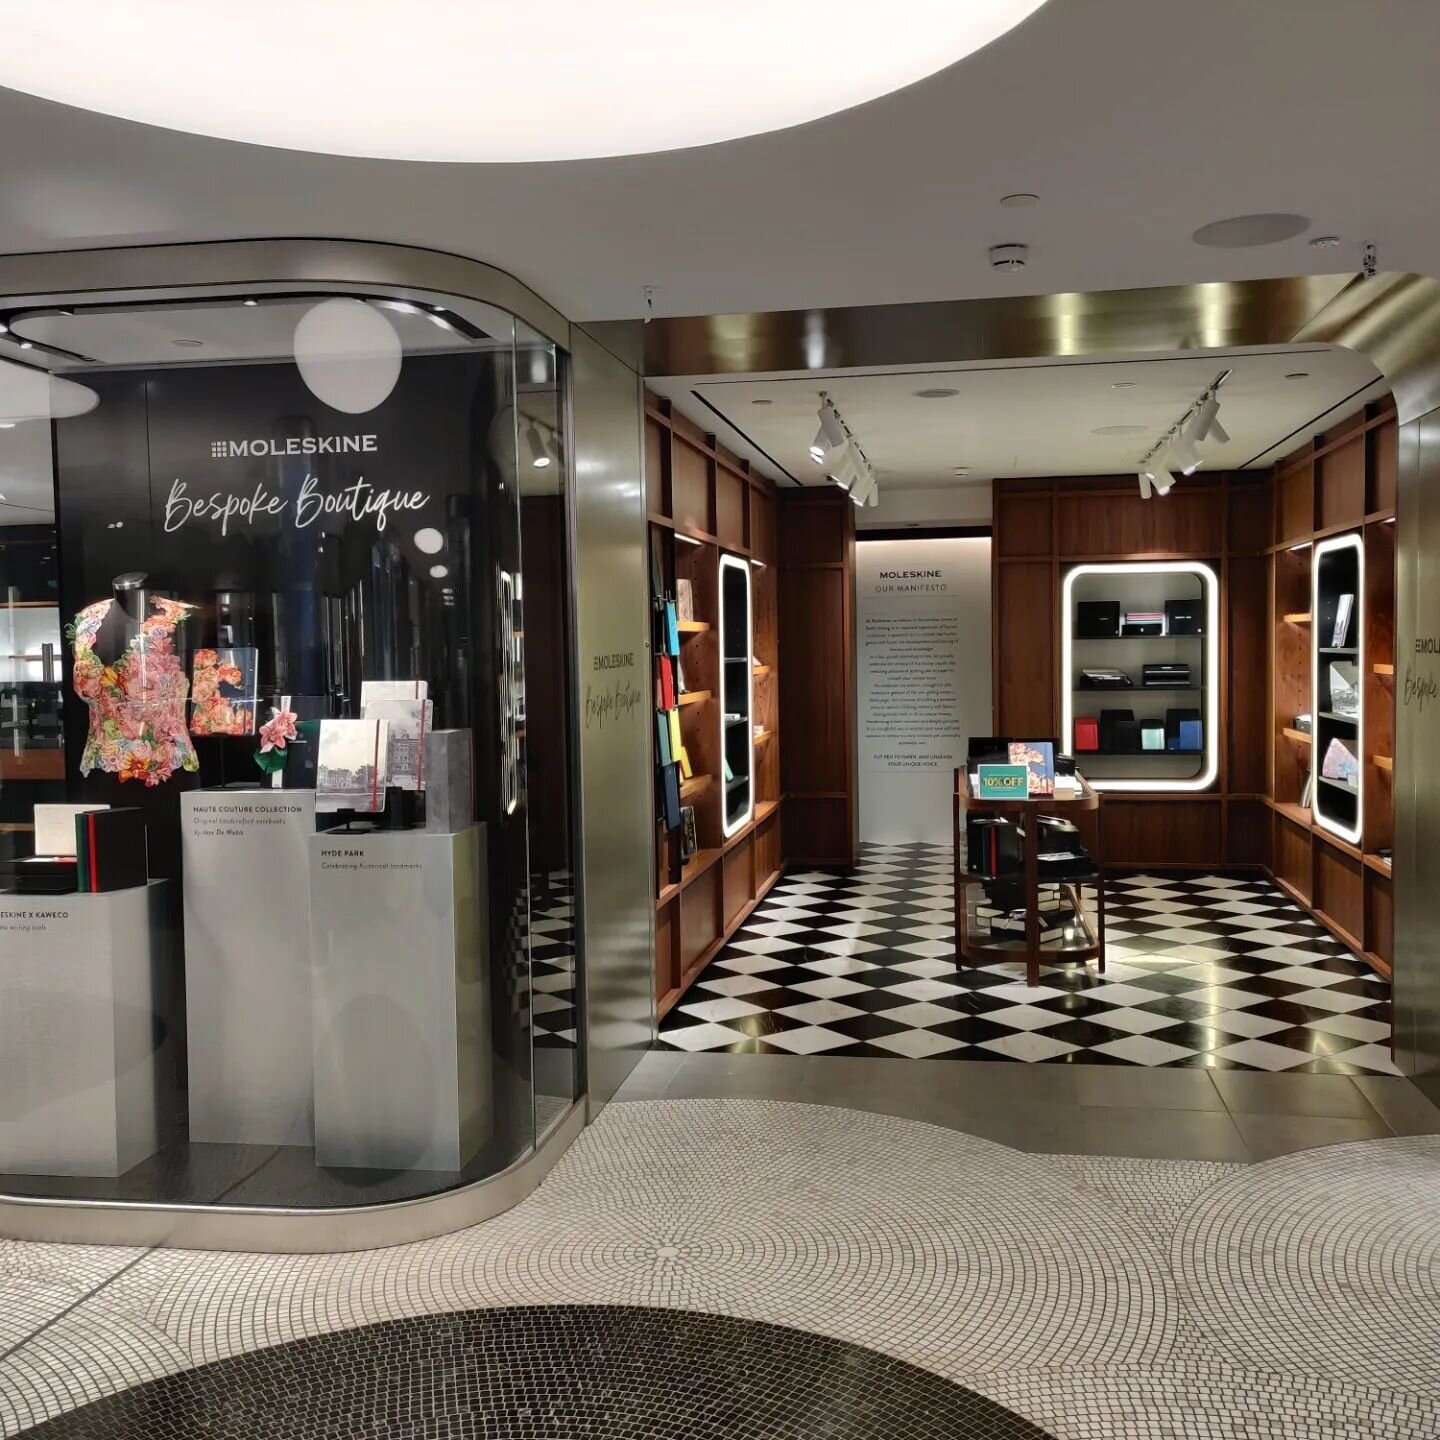 Come and discover the new Moleskine Bespoke Boutique in Harrods, where you will find exclusive products designed in partnership with amazing Brands and Artists.
Thank you the Moleskine team for having trusted me and appointed me as the Retail Archite